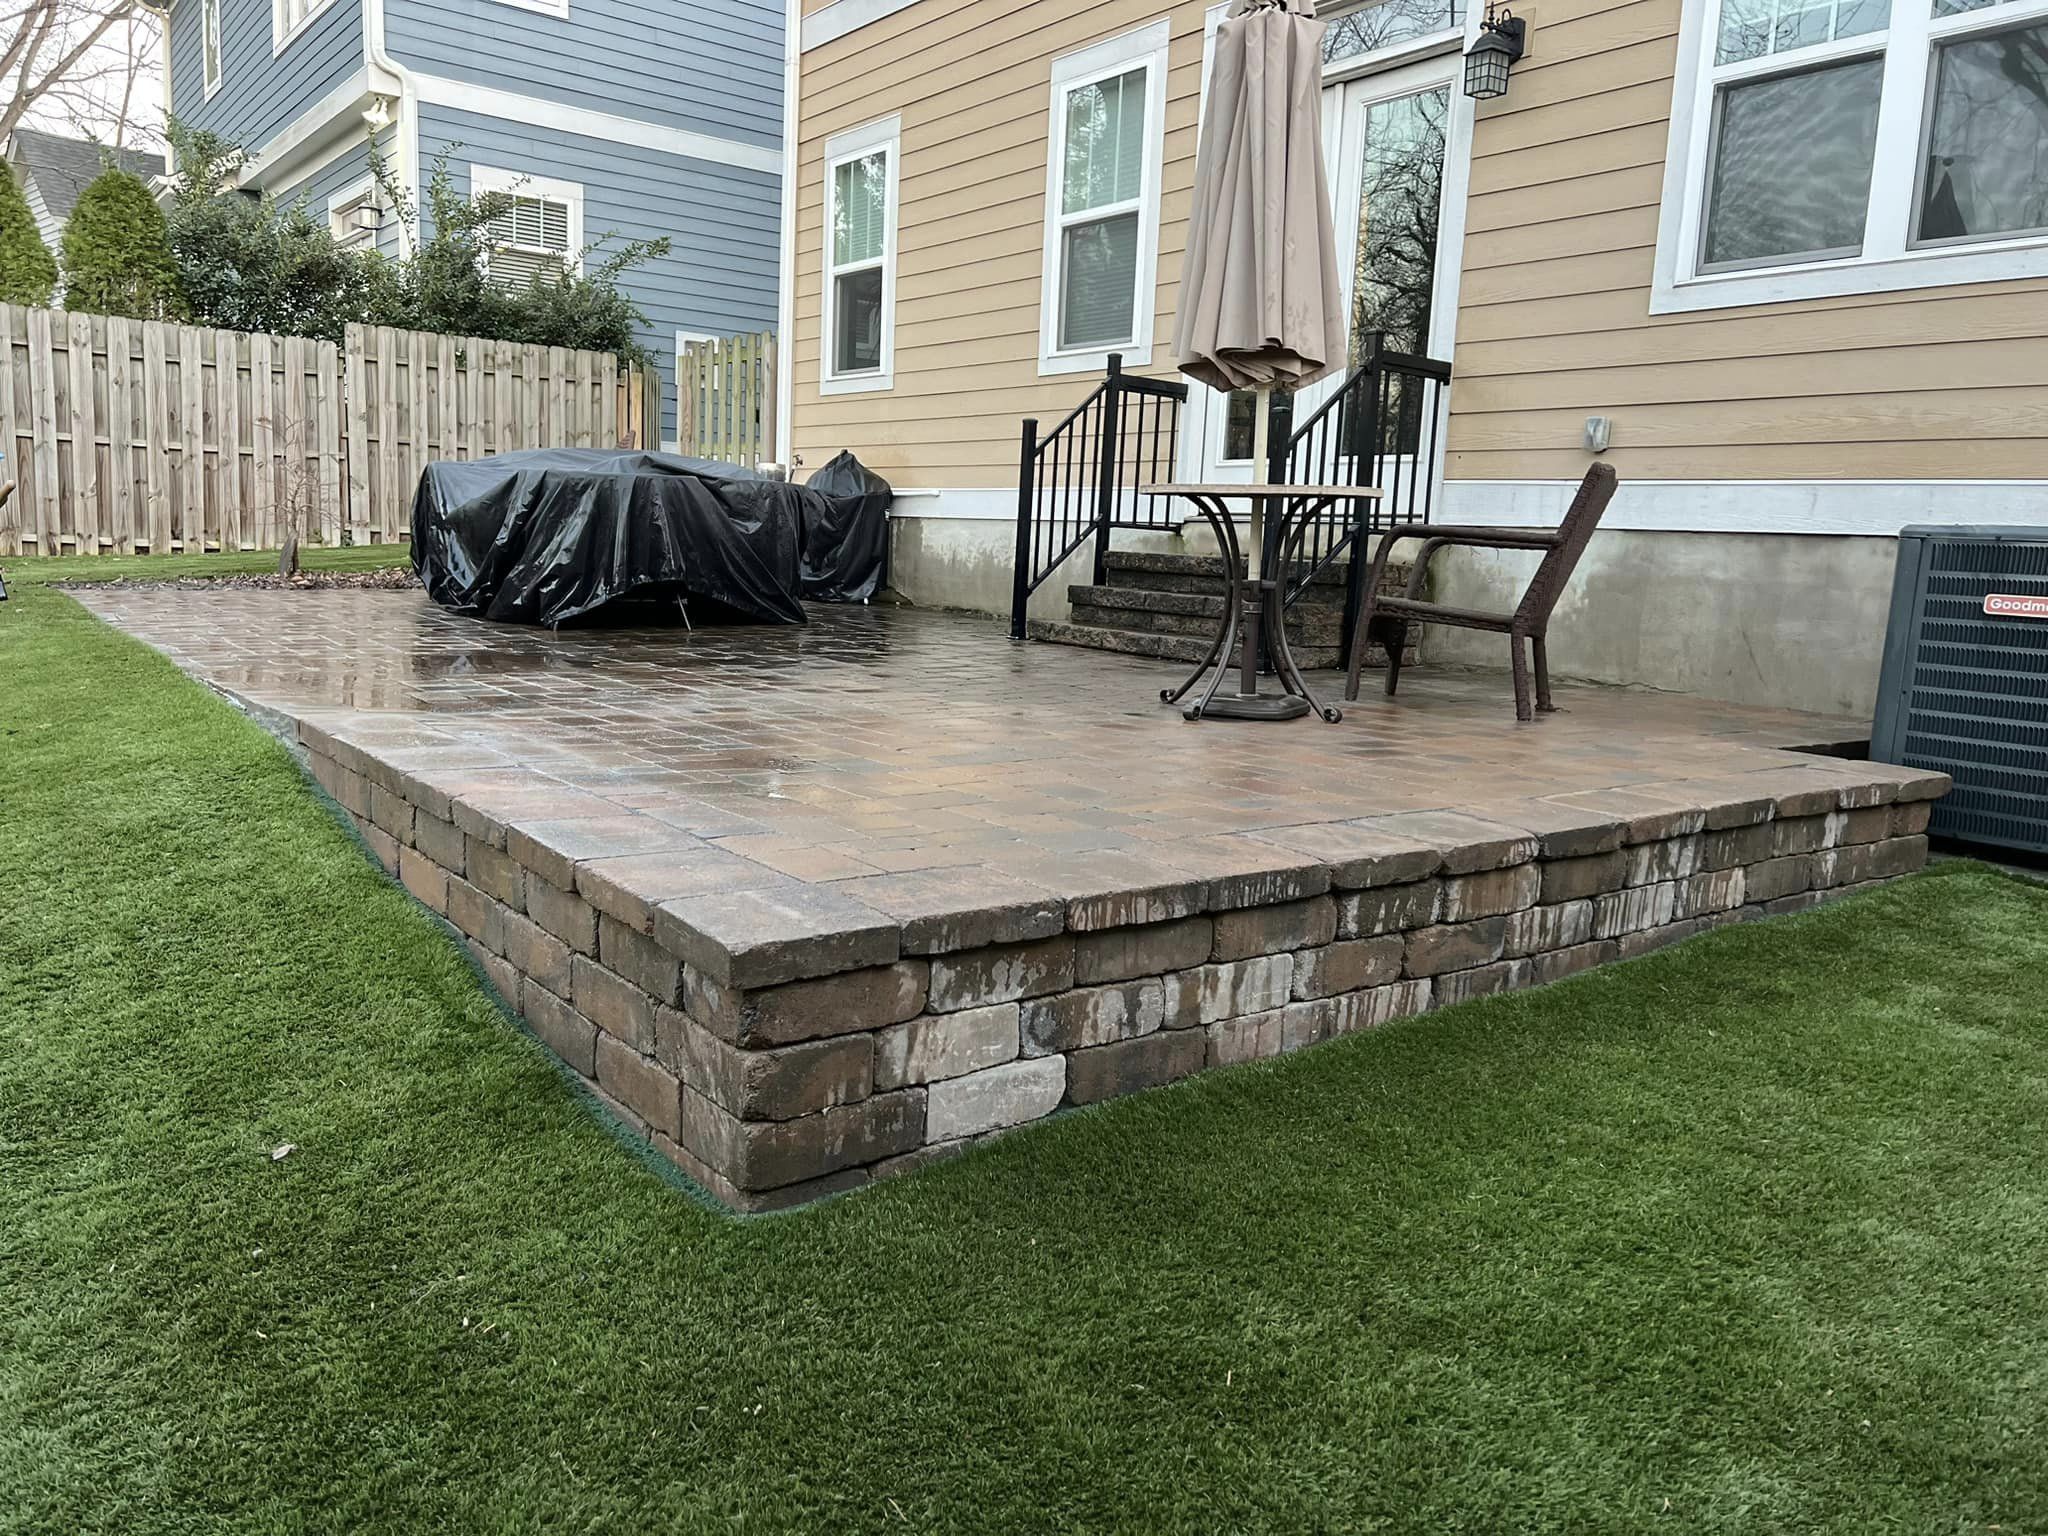 Paver Patio with a Wall Level with the Pavers – Outdoor Living Tip of the Day